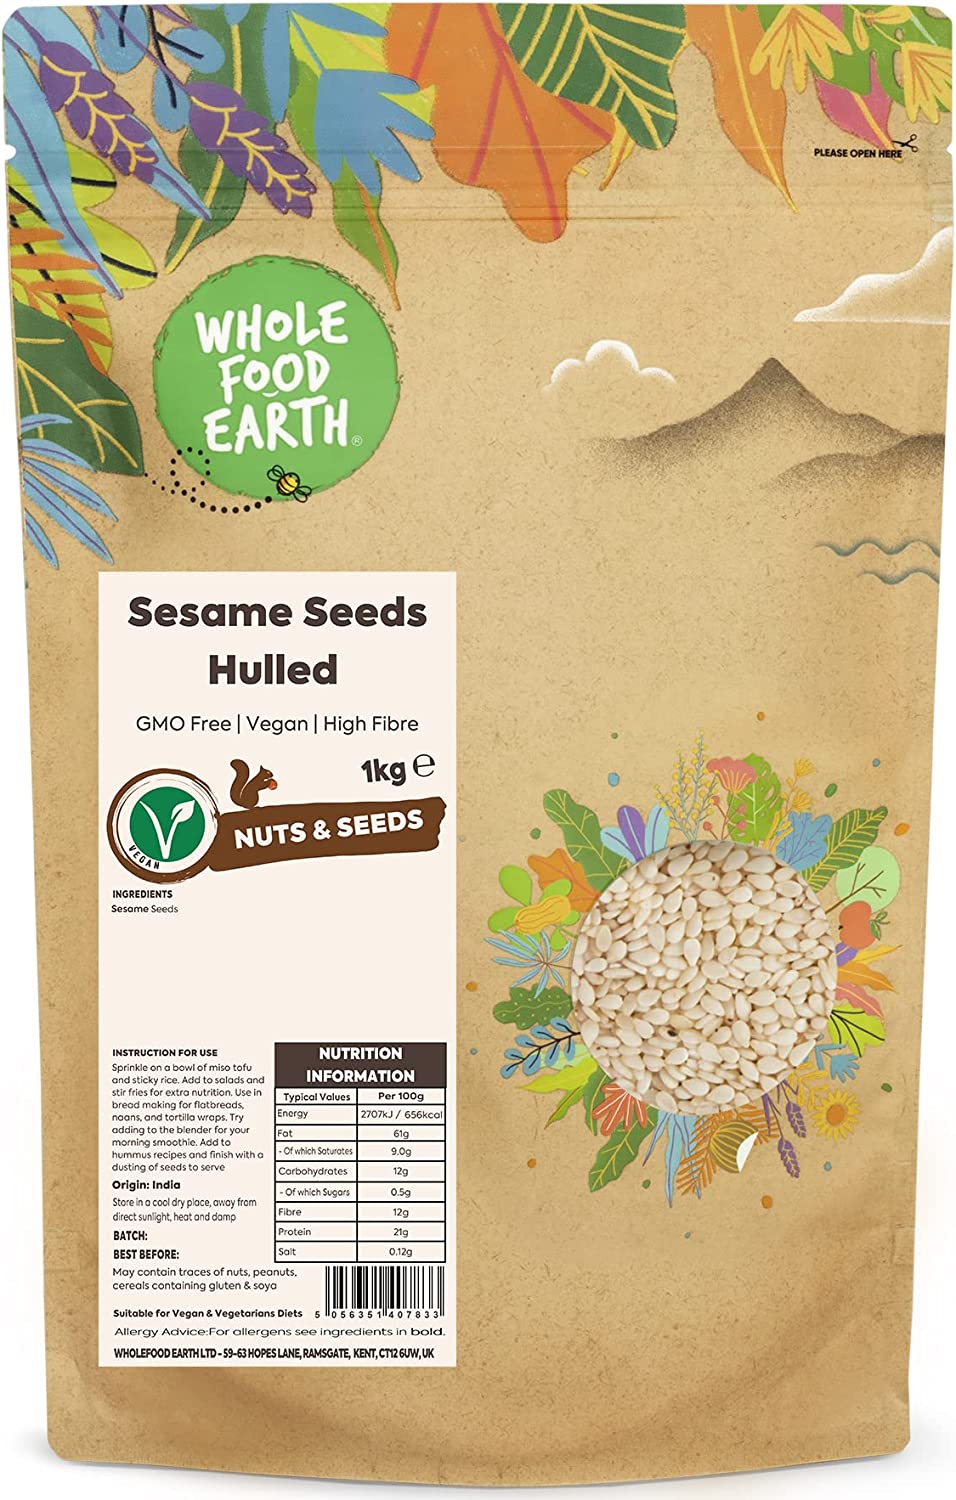 Wholefood Earth Sesame Seeds Hulled 1kg (Oct 22) RRP 12.33 CLEARANCE XL 7.99